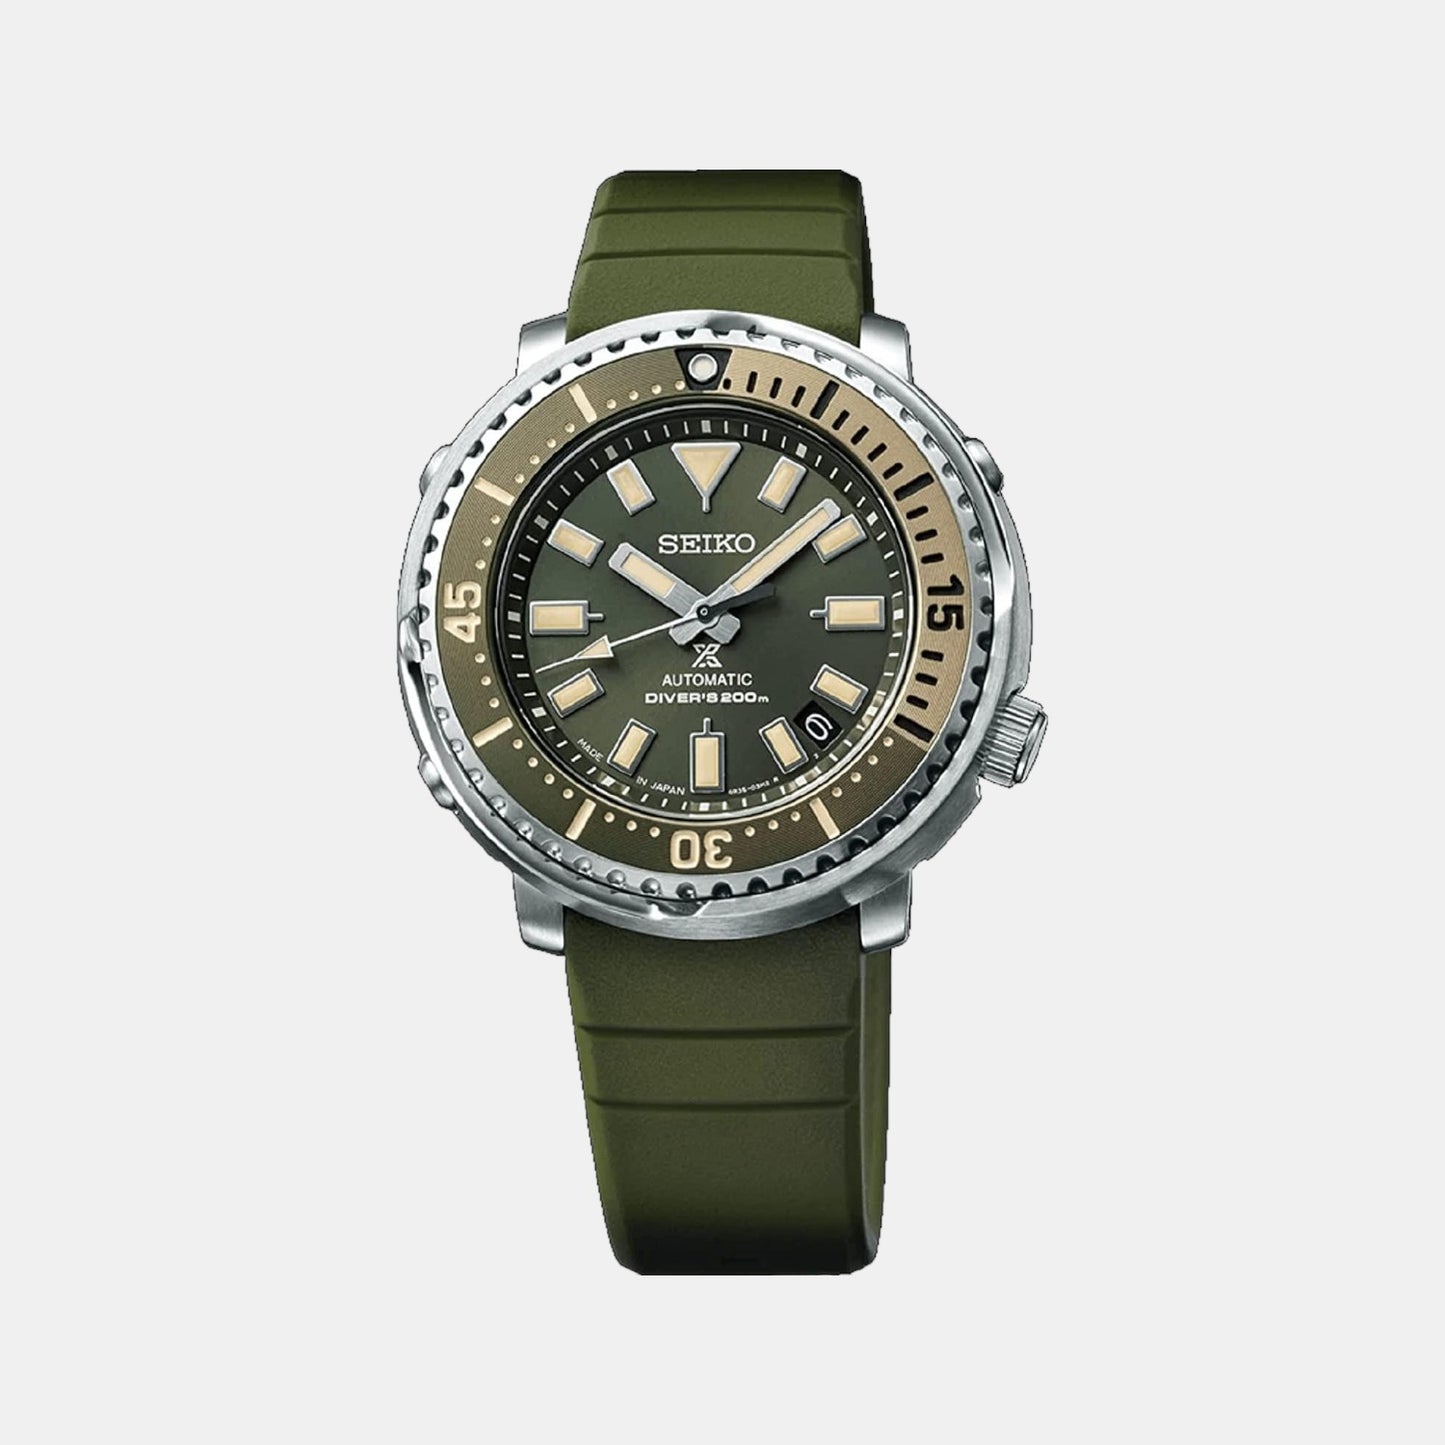 Prospex Male Green Analog Silicon Automatic Watch SRPF83K1